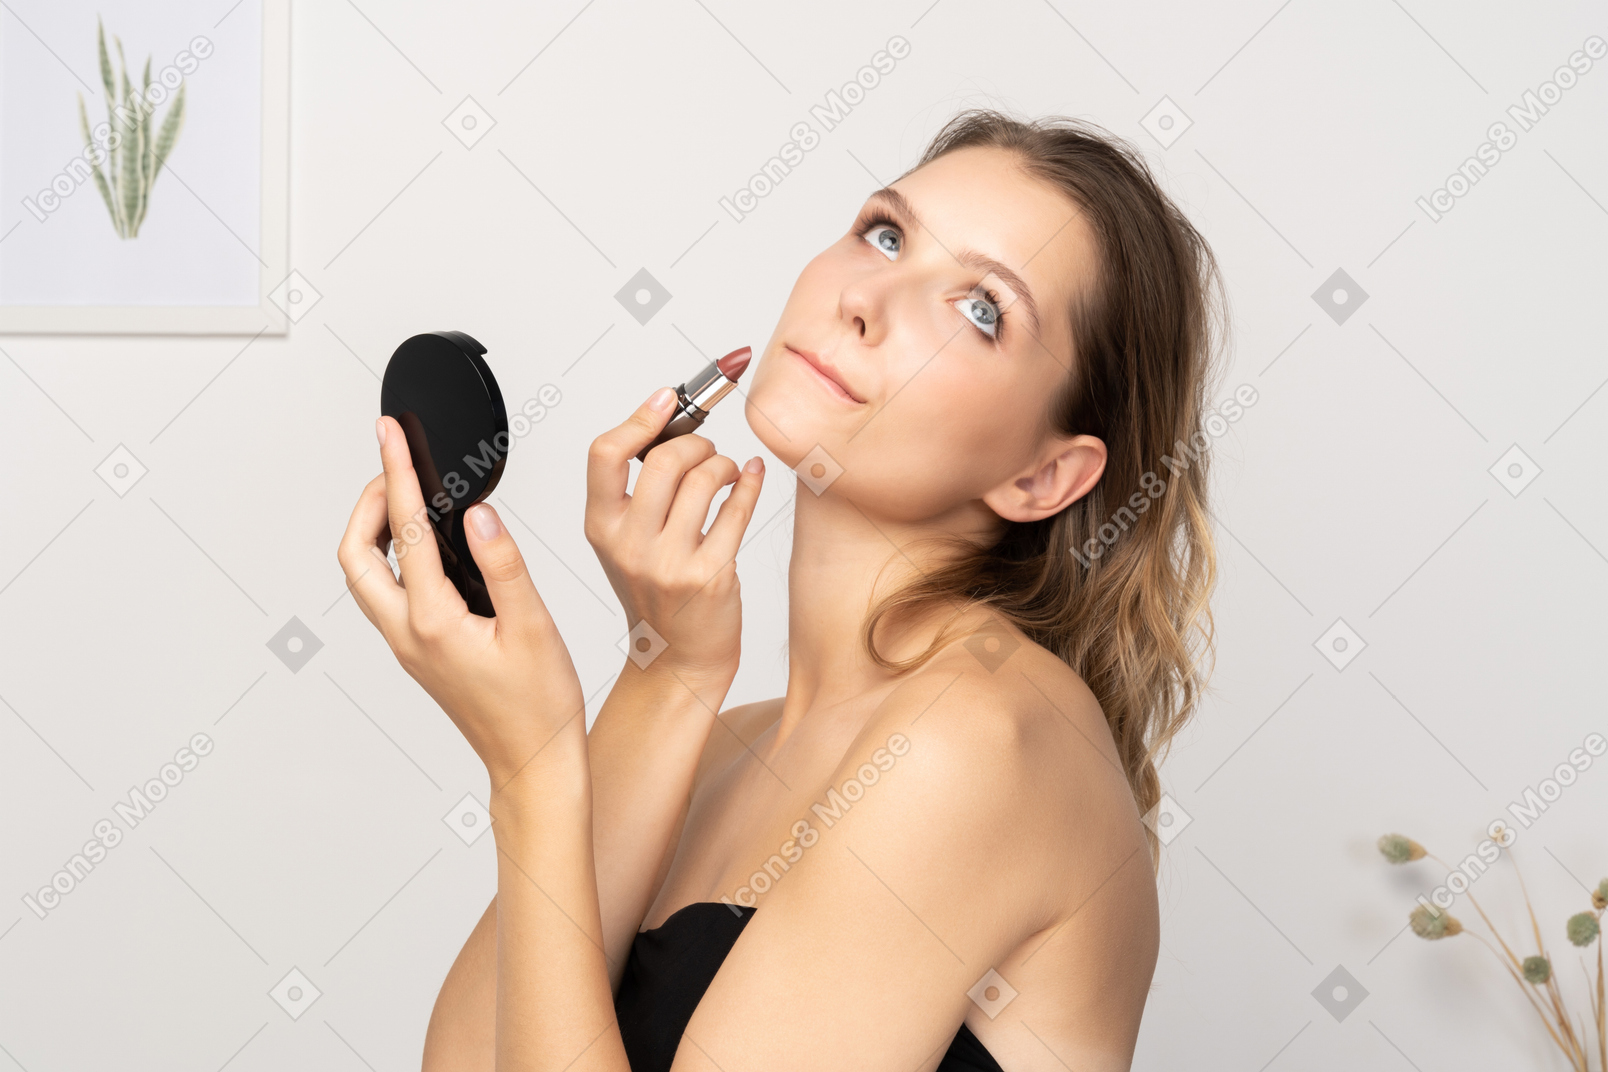 Side view of a young woman applying lipstick while holding a mirror